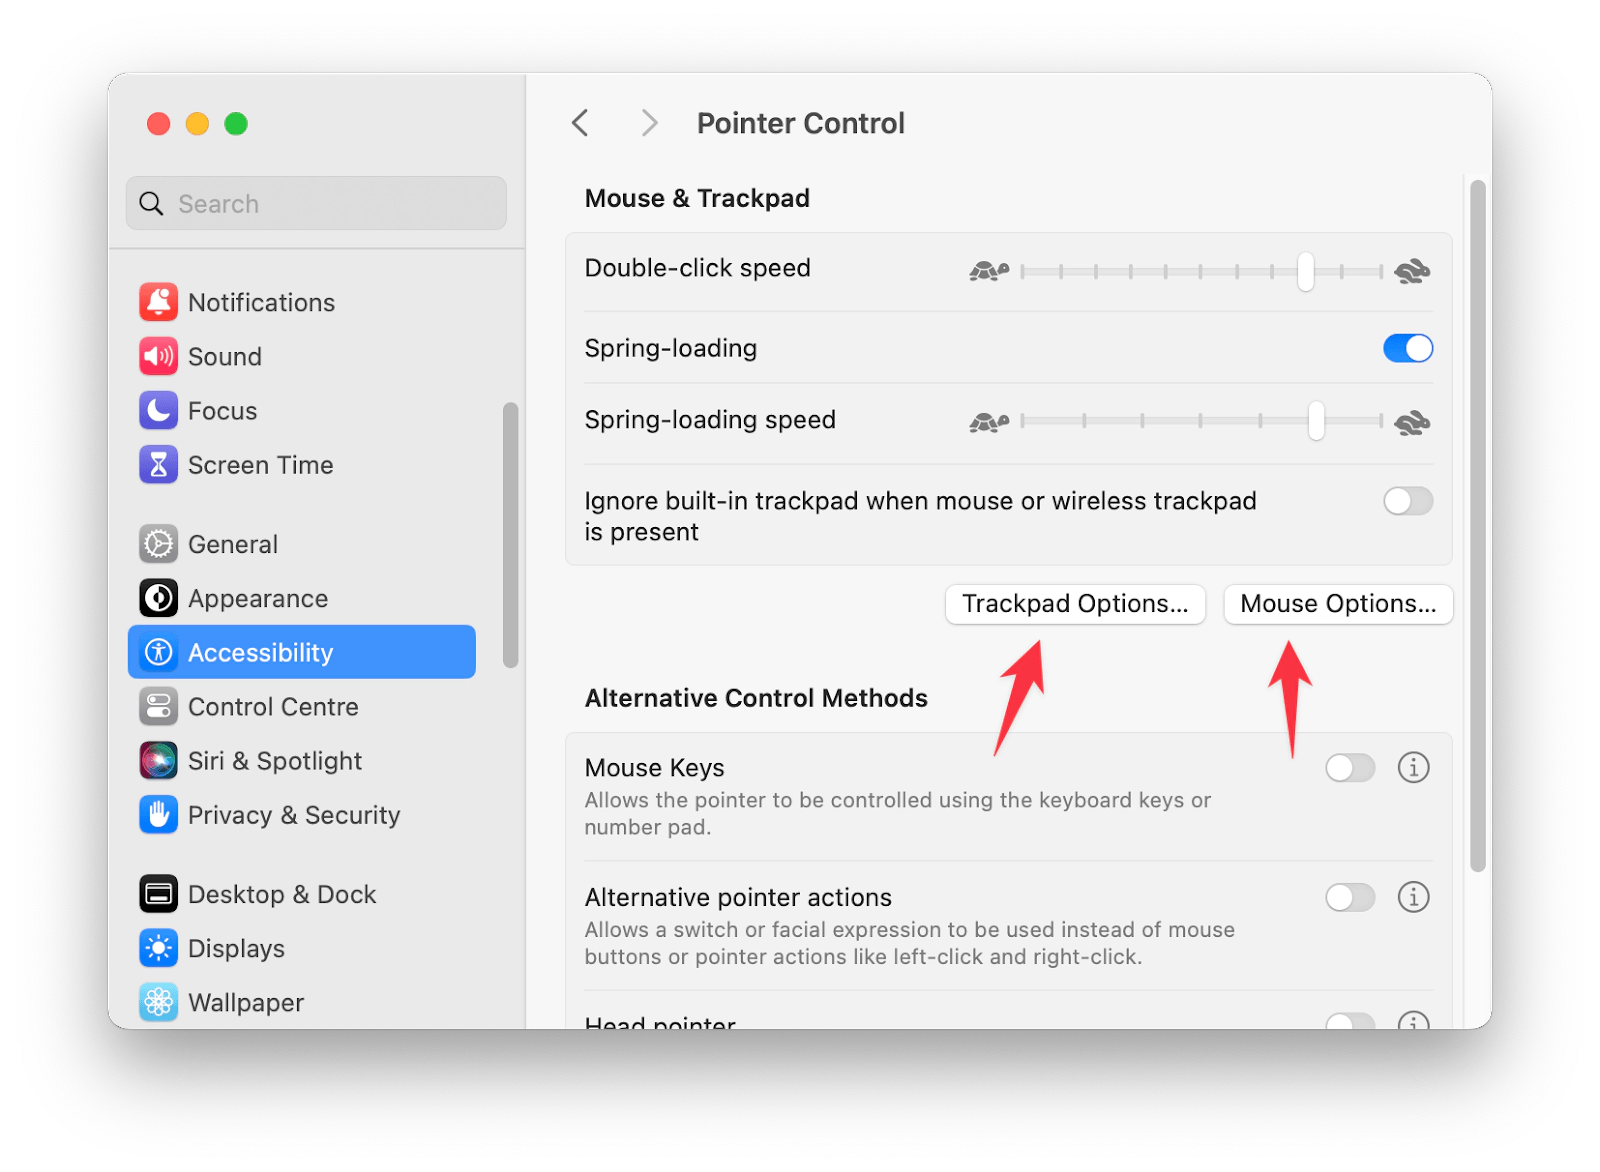 Pointer Control's options